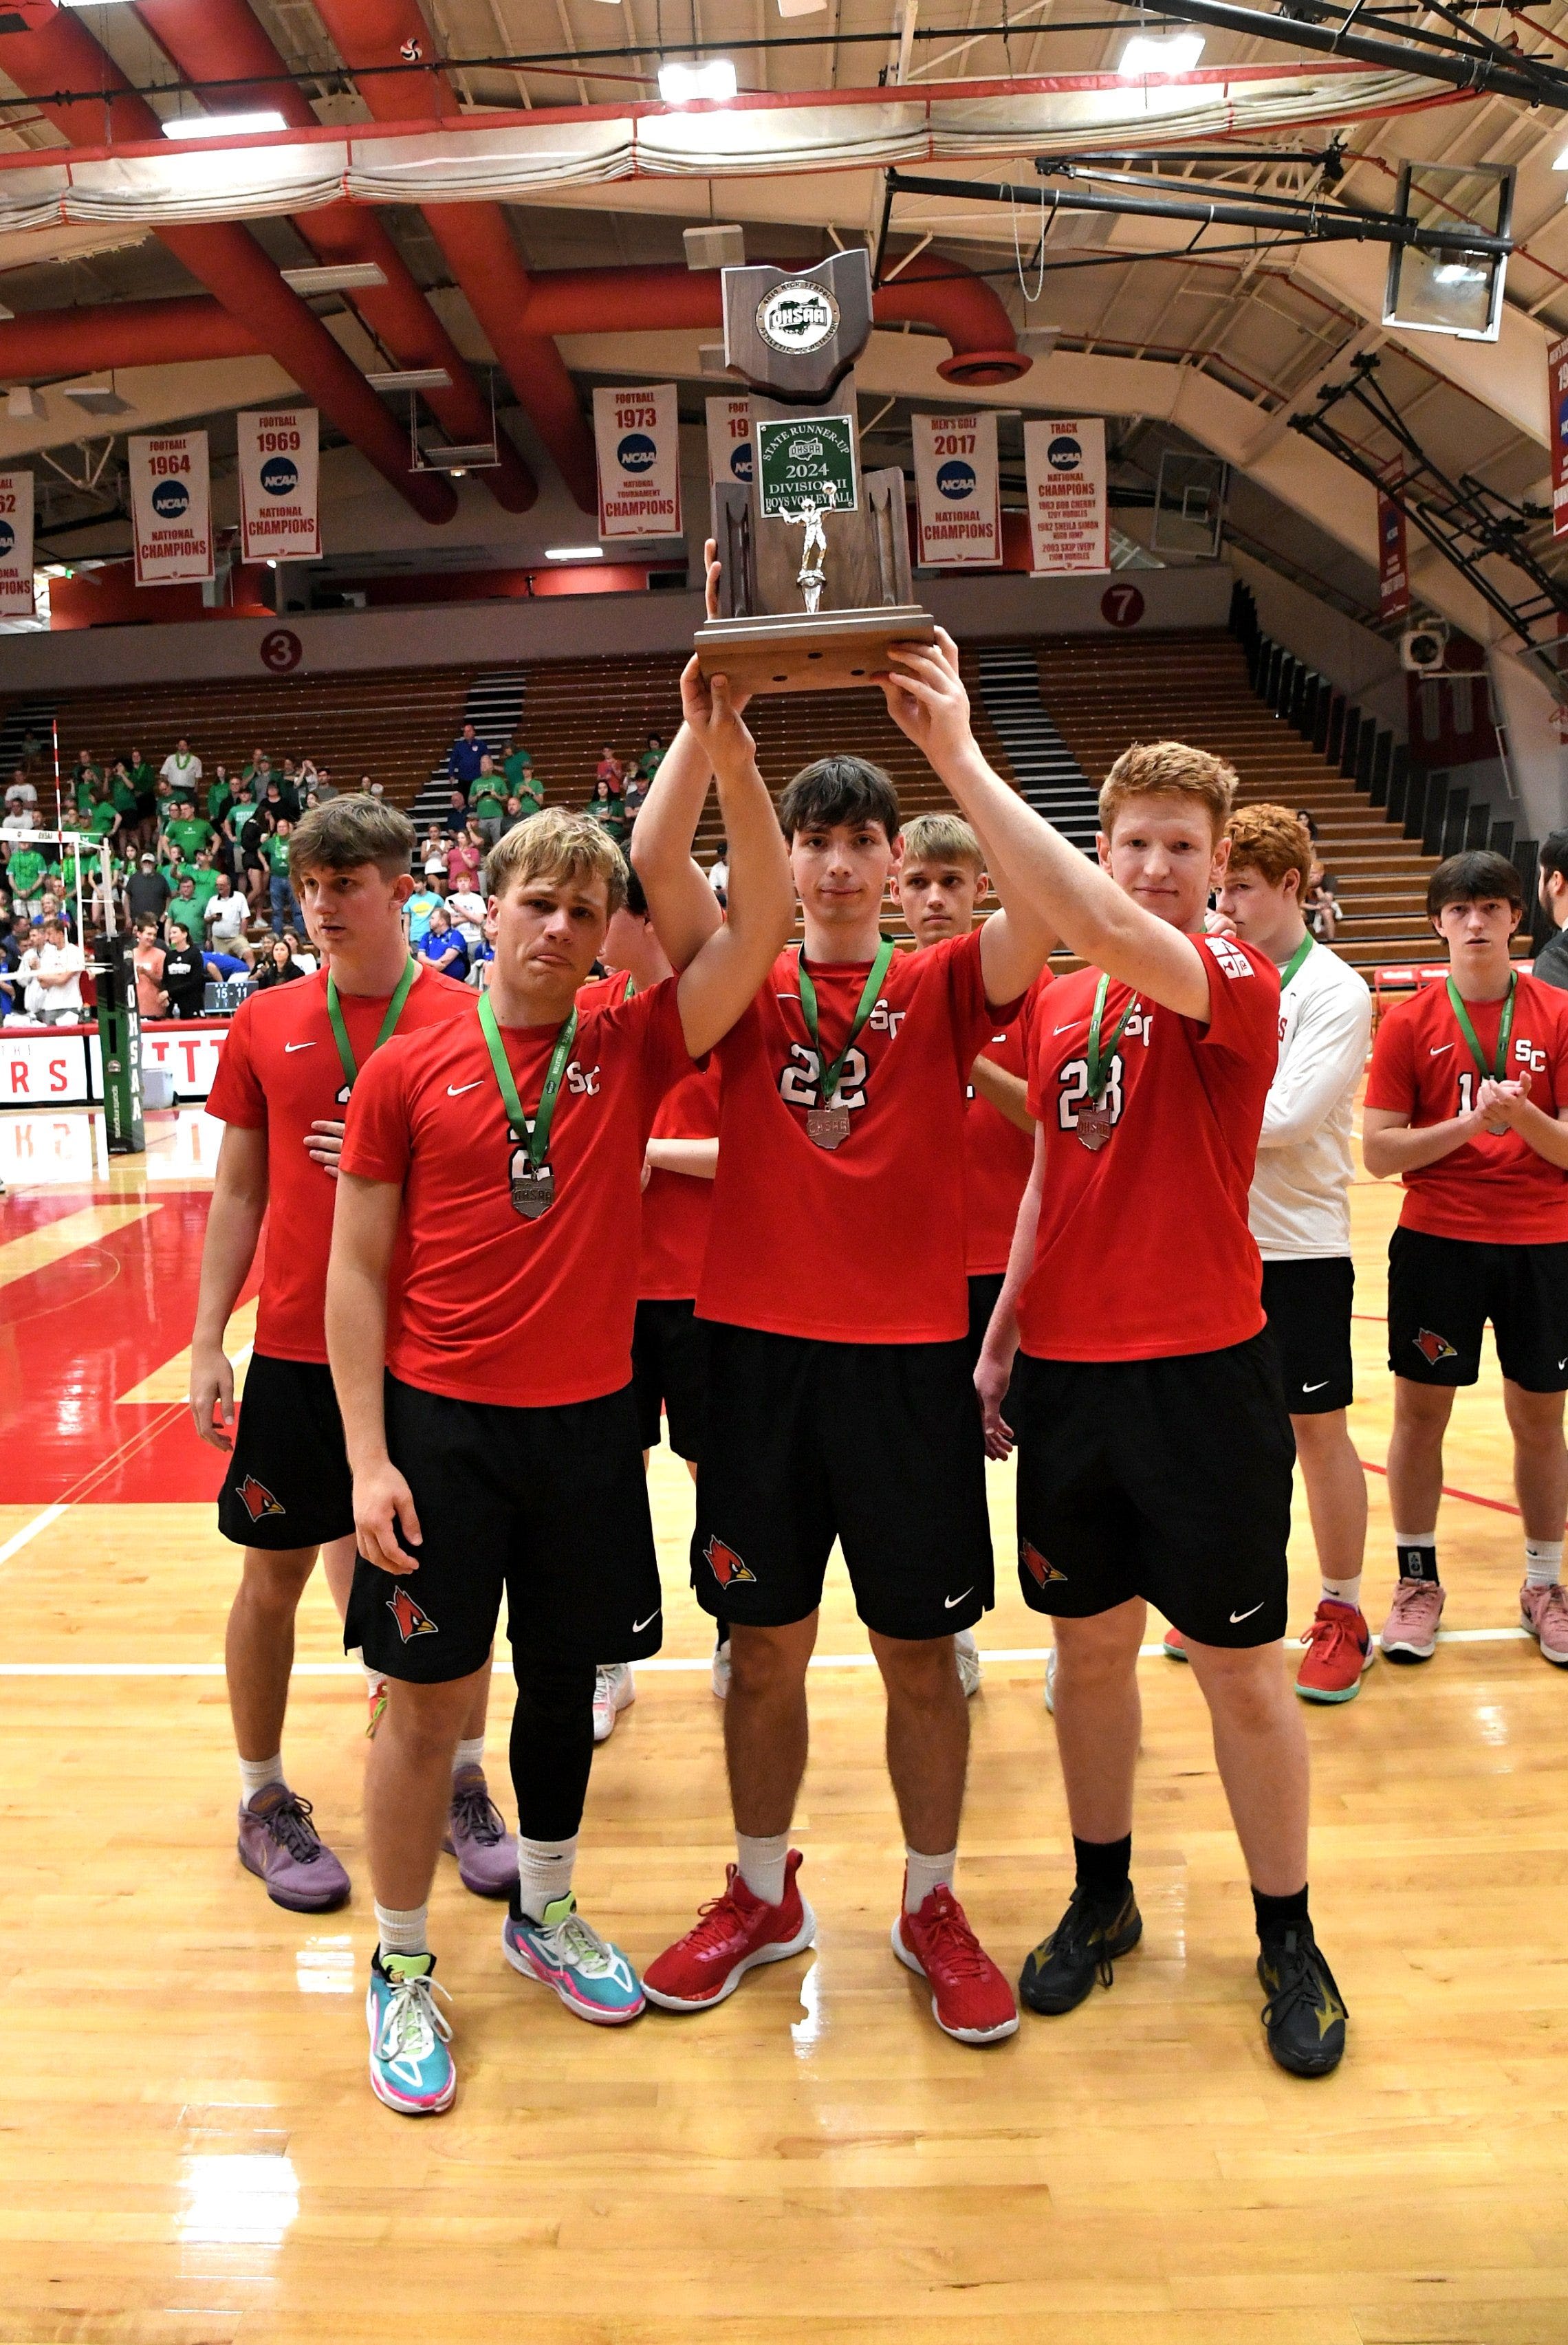 St. Charles goes 5 sets, falls to McNicholas in OHSAA boys volleyball state championship